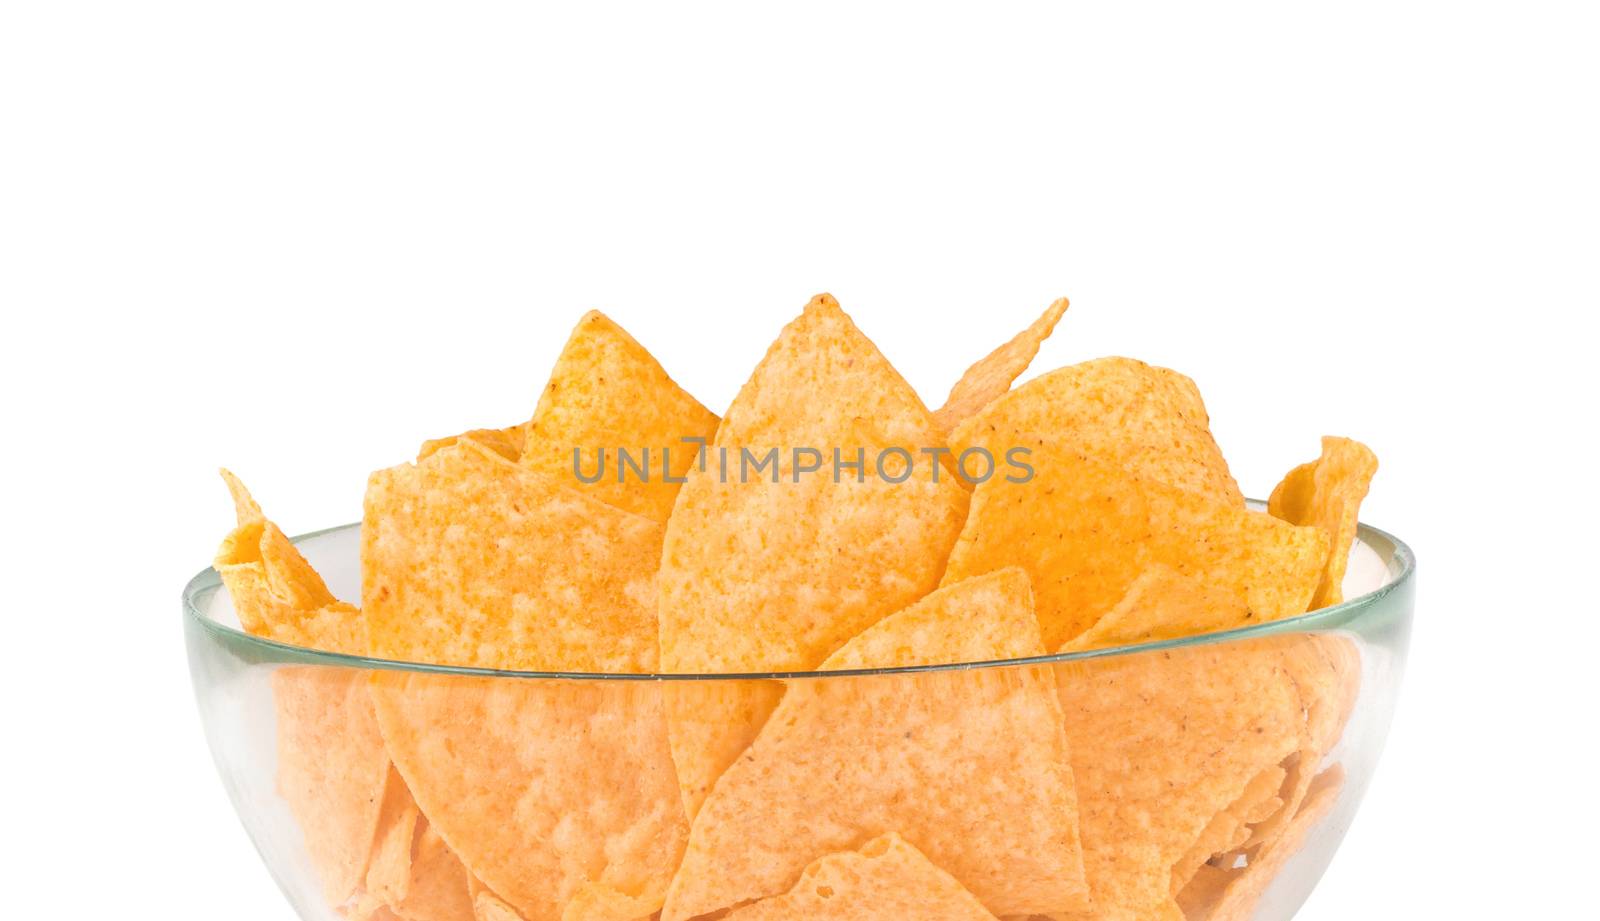 the nachos chips in bowl close up by ozaiachin